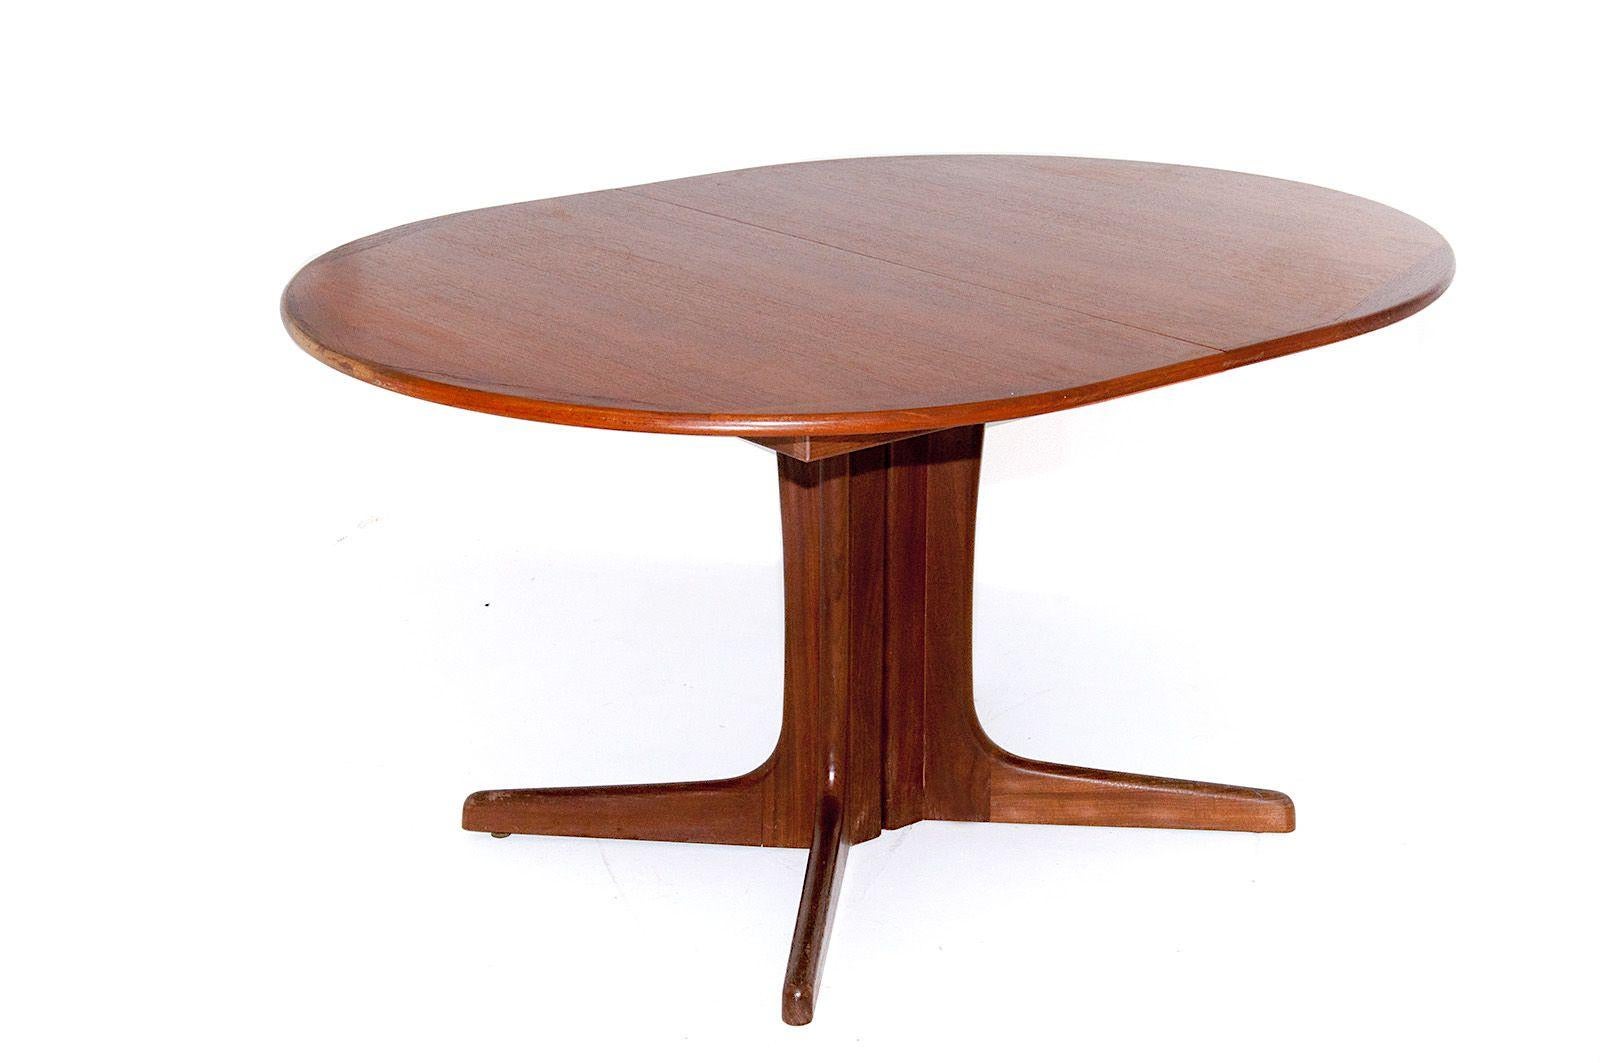 Scandinavian Modern Large Dinning Table by Niels Otto Moller, in Teak, Denmark, 1960, Brown Color